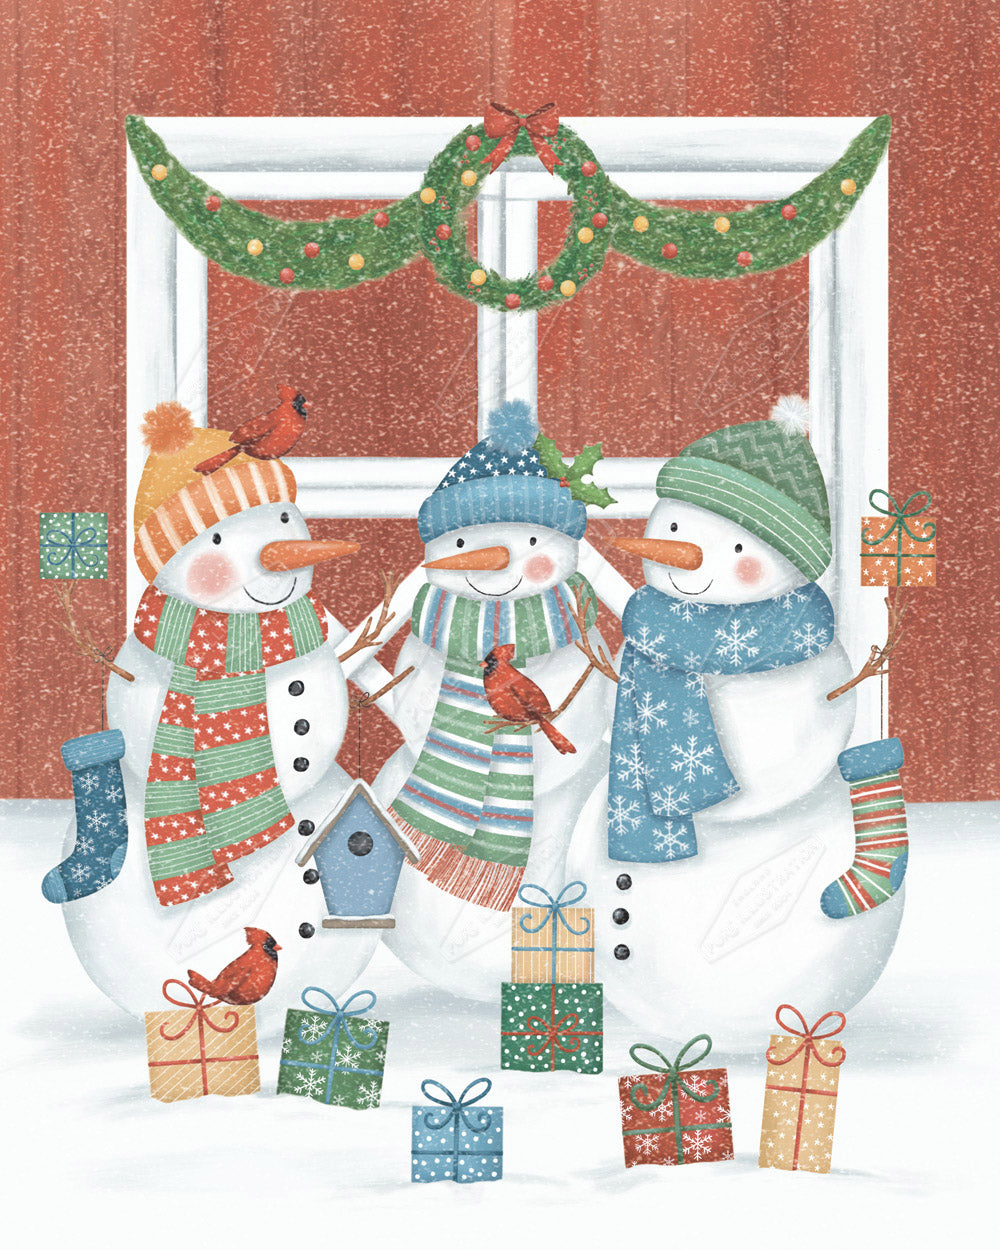 00035473AAI - Snowmen and Red Barn Design for Greeting Cards & Gift Bags - Anna Aitken is represented by Pure Art Licensing Agency - Christmas Greeting Card